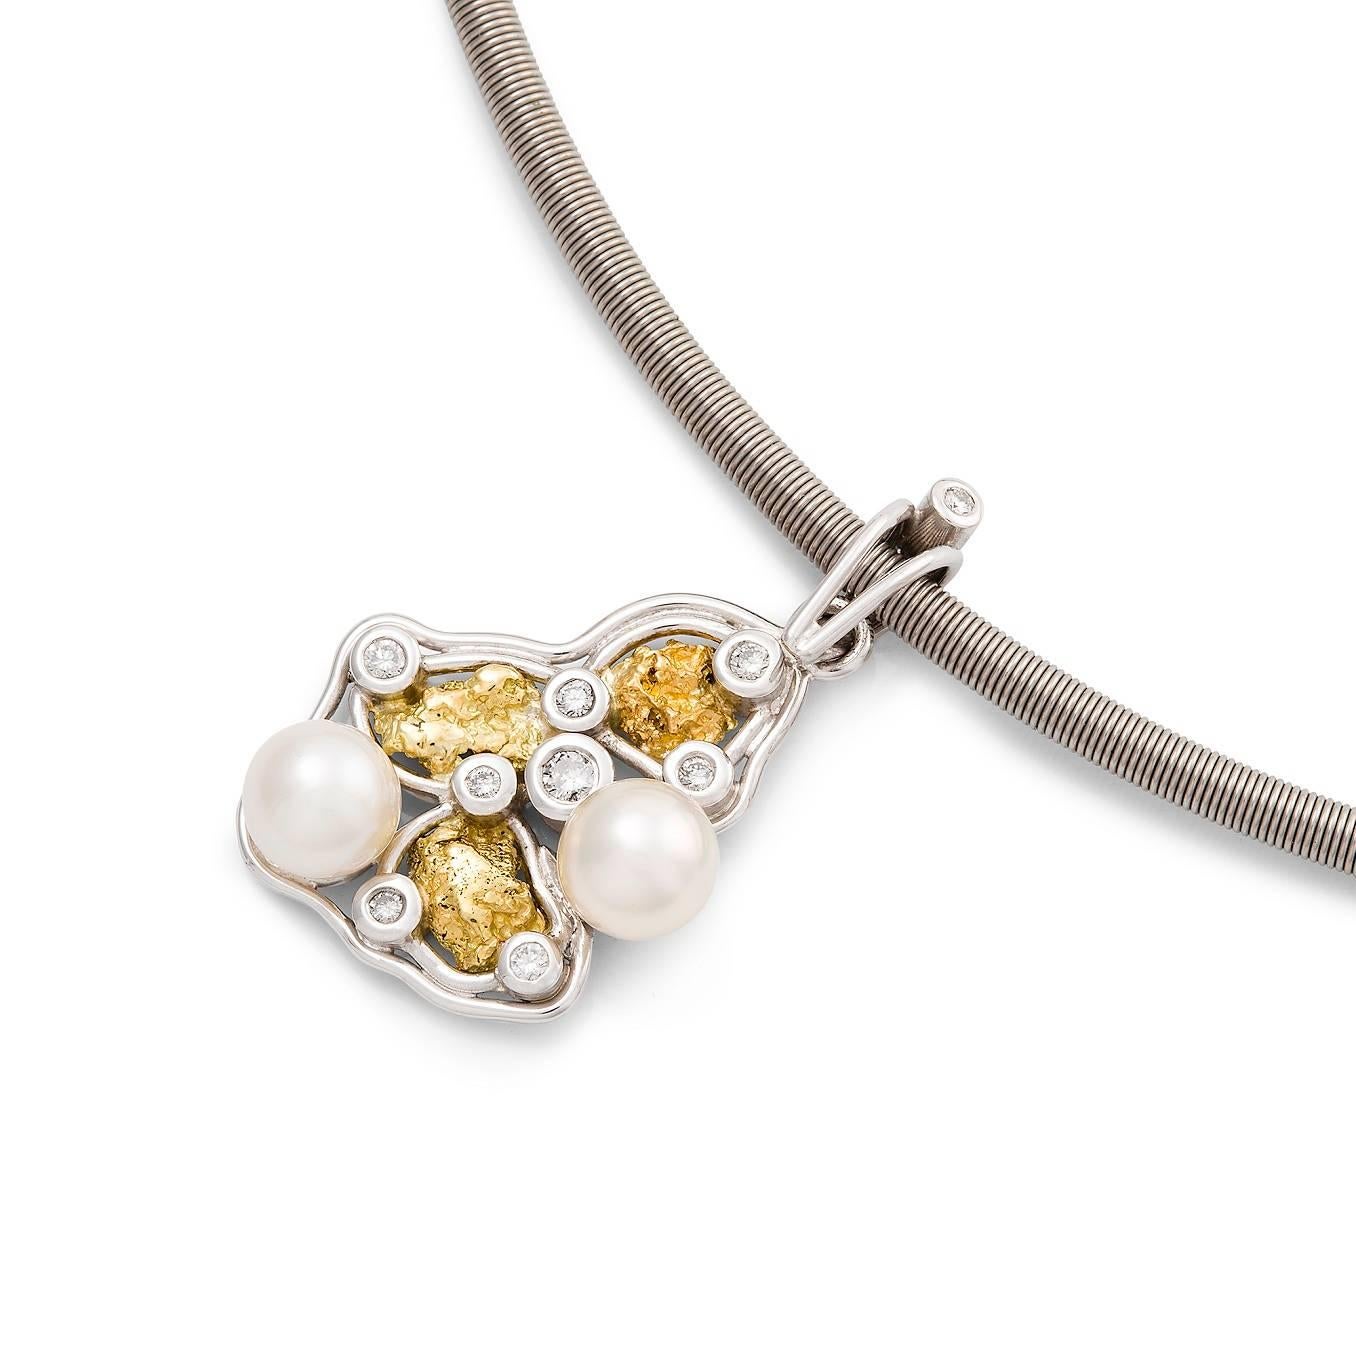 Pepita & Perla Neckpiece

This stunning hand crafted 18ct white gold pendant represents Western Australia's resource wealth. Set with Kalgoorlie nuggets, Argyle diamonds and Broome pearls and suspended from an elegant cable chain, this necklace is a